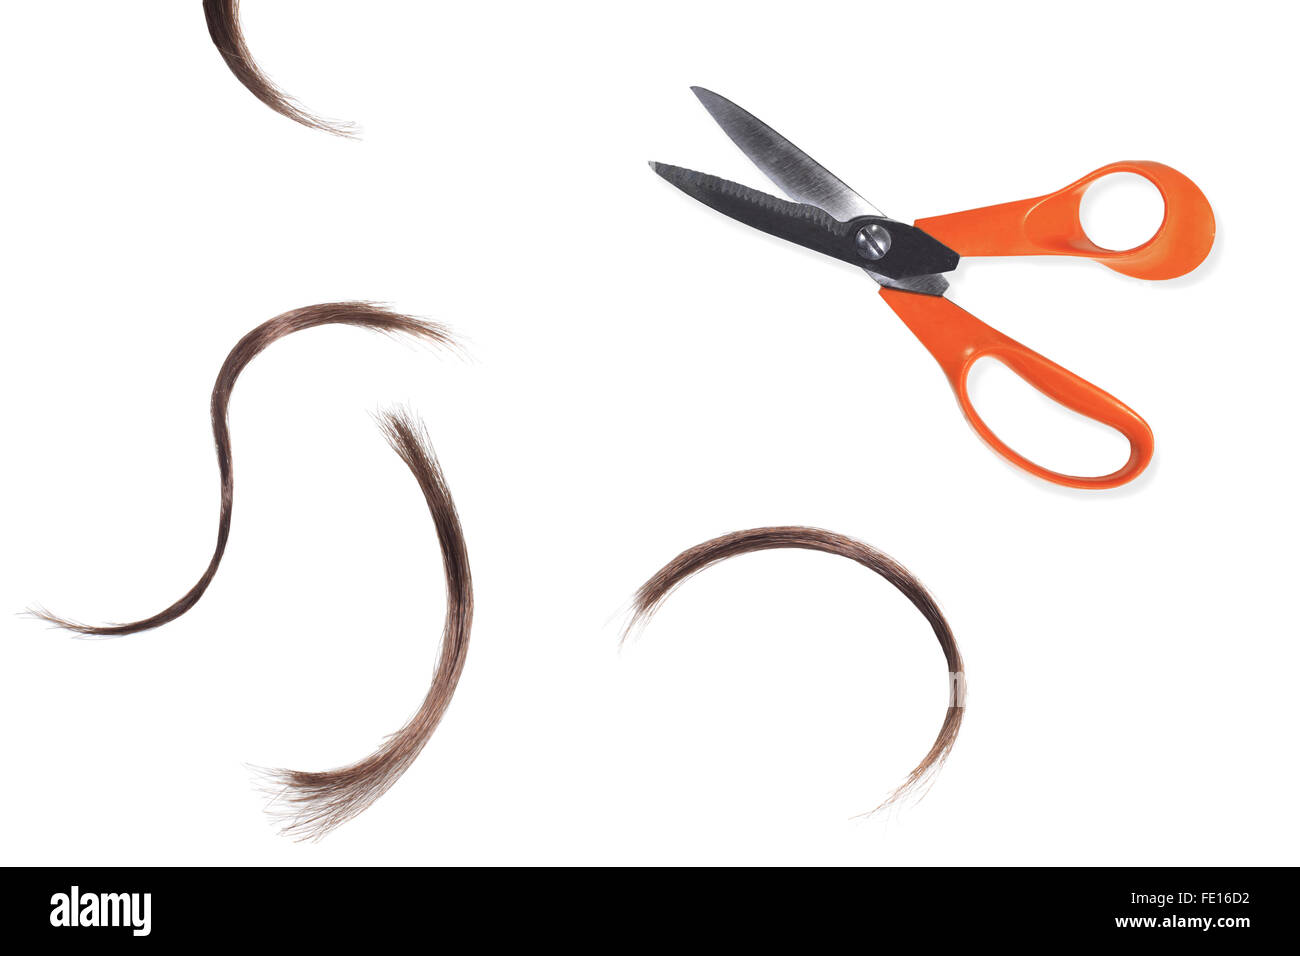 Studio Shot of a Pair of Scissors and Hair Clippings on a White Background Stock Photo